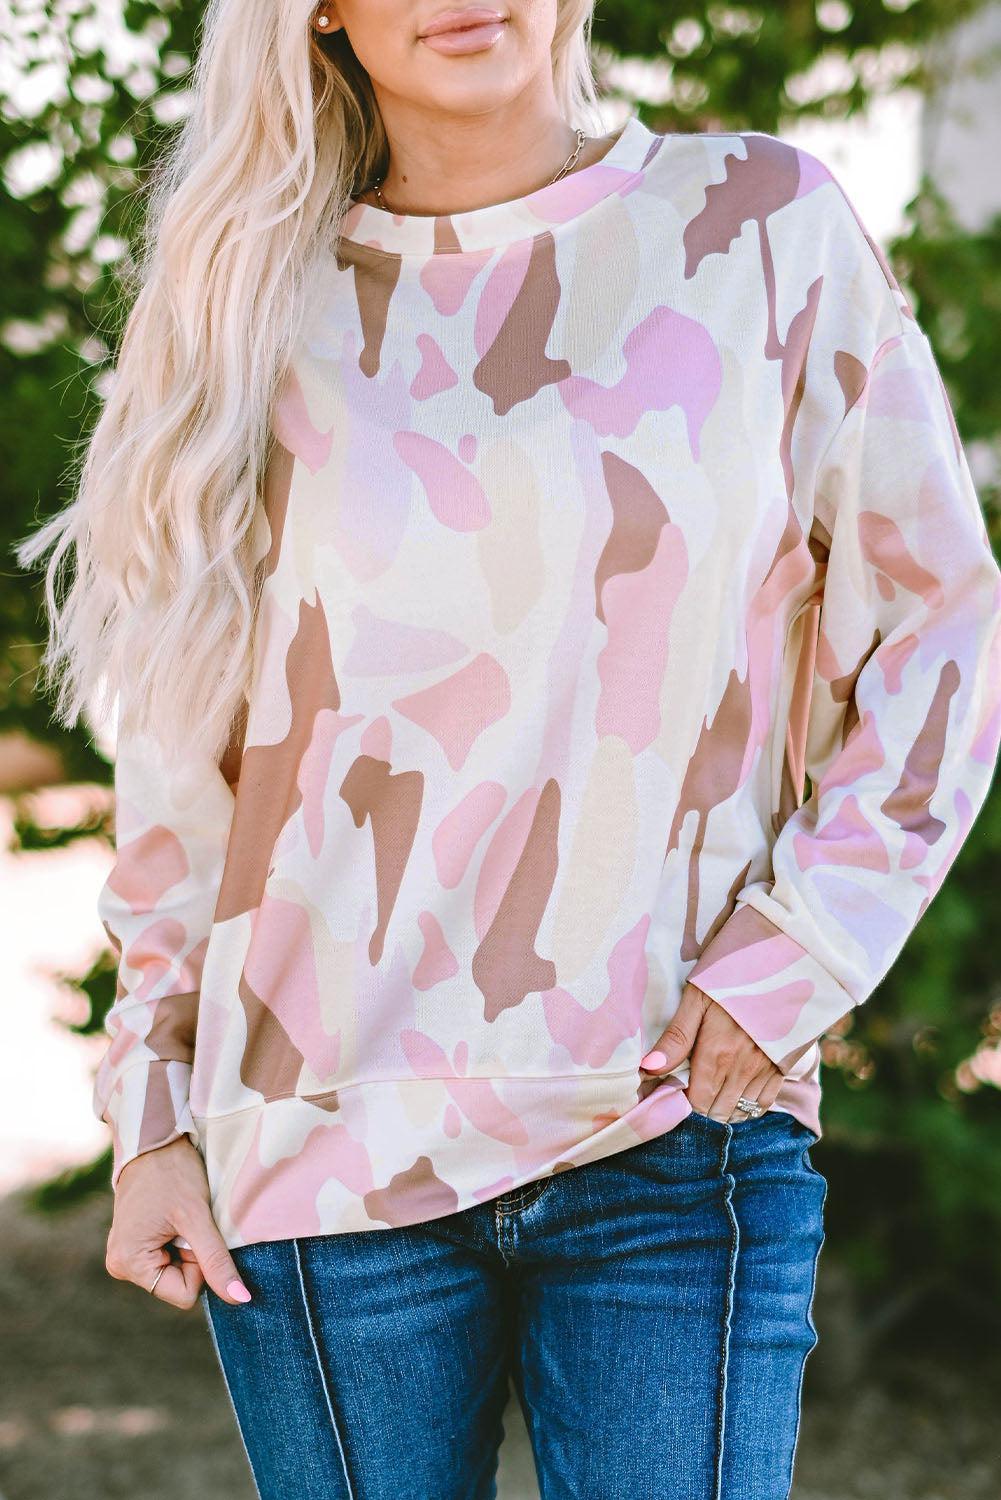 a woman wearing a pink camo sweatshirt and jeans